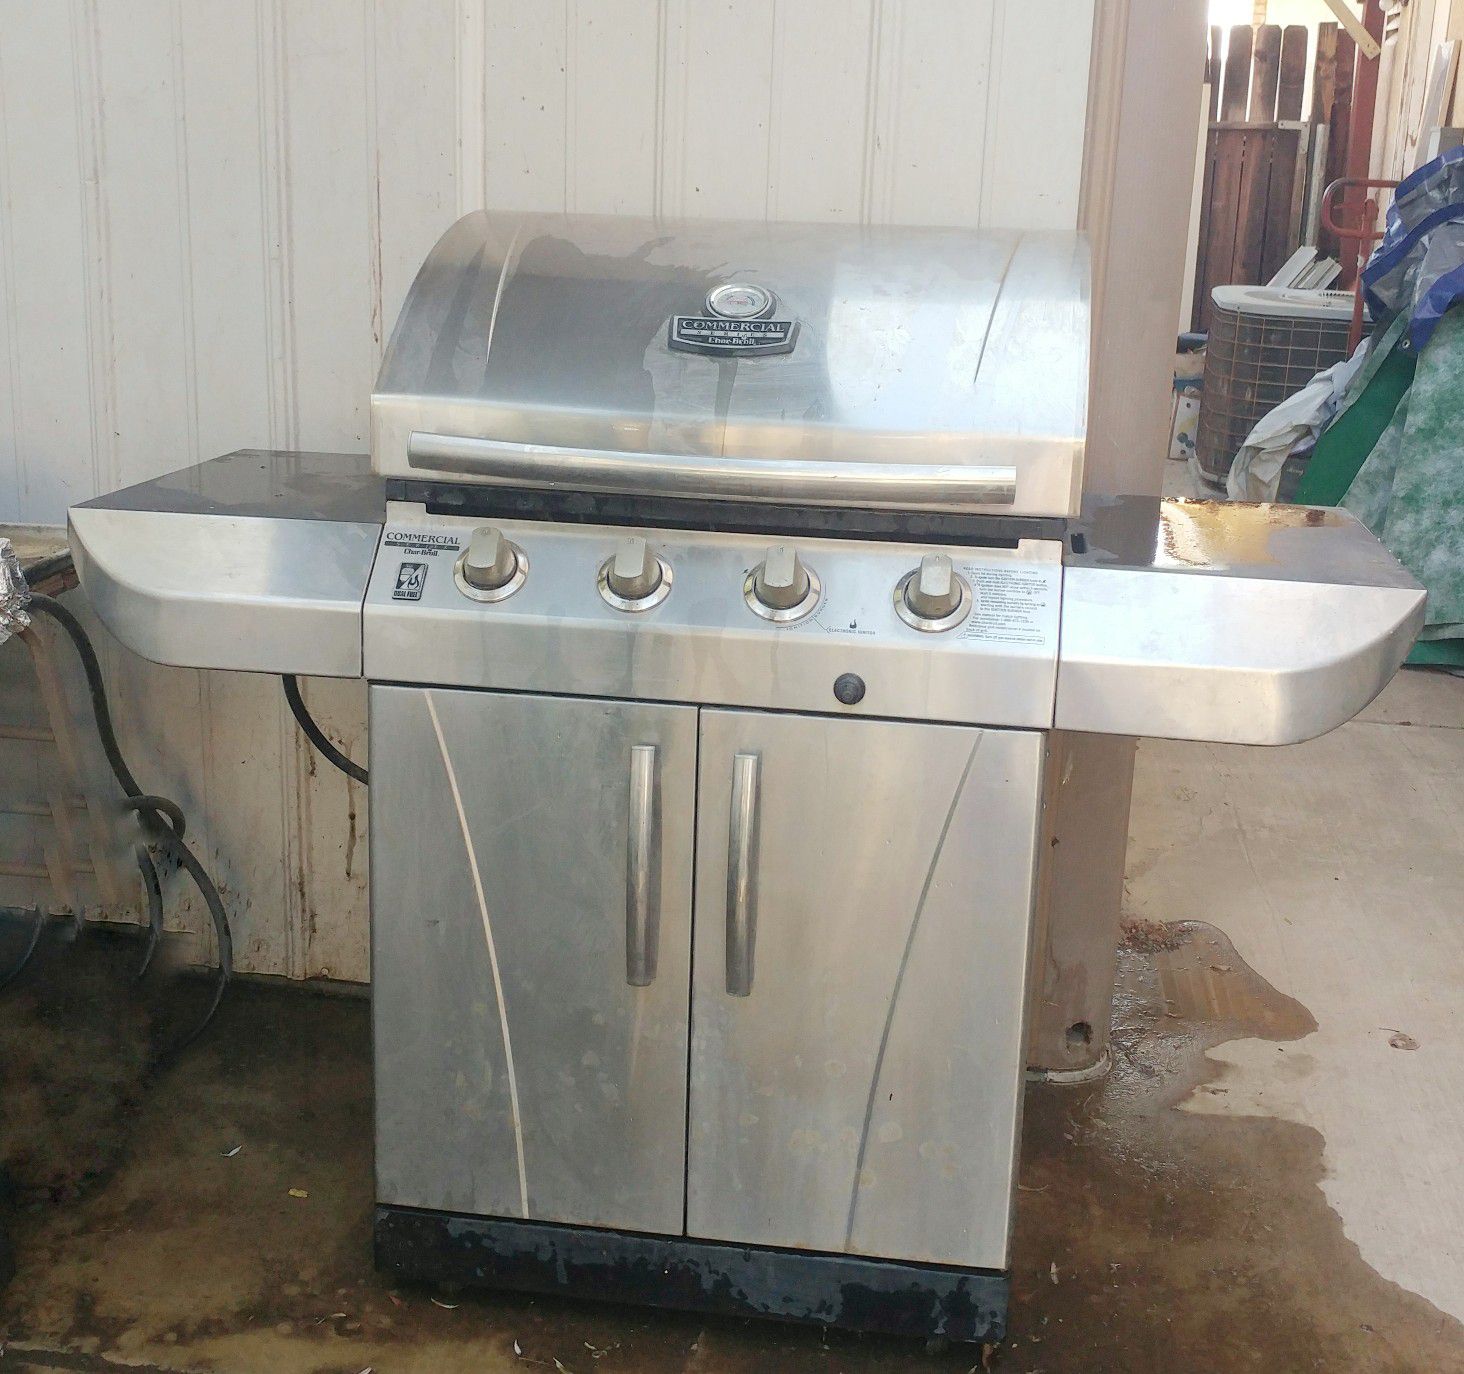 Gas BBQ grill works great in good condition